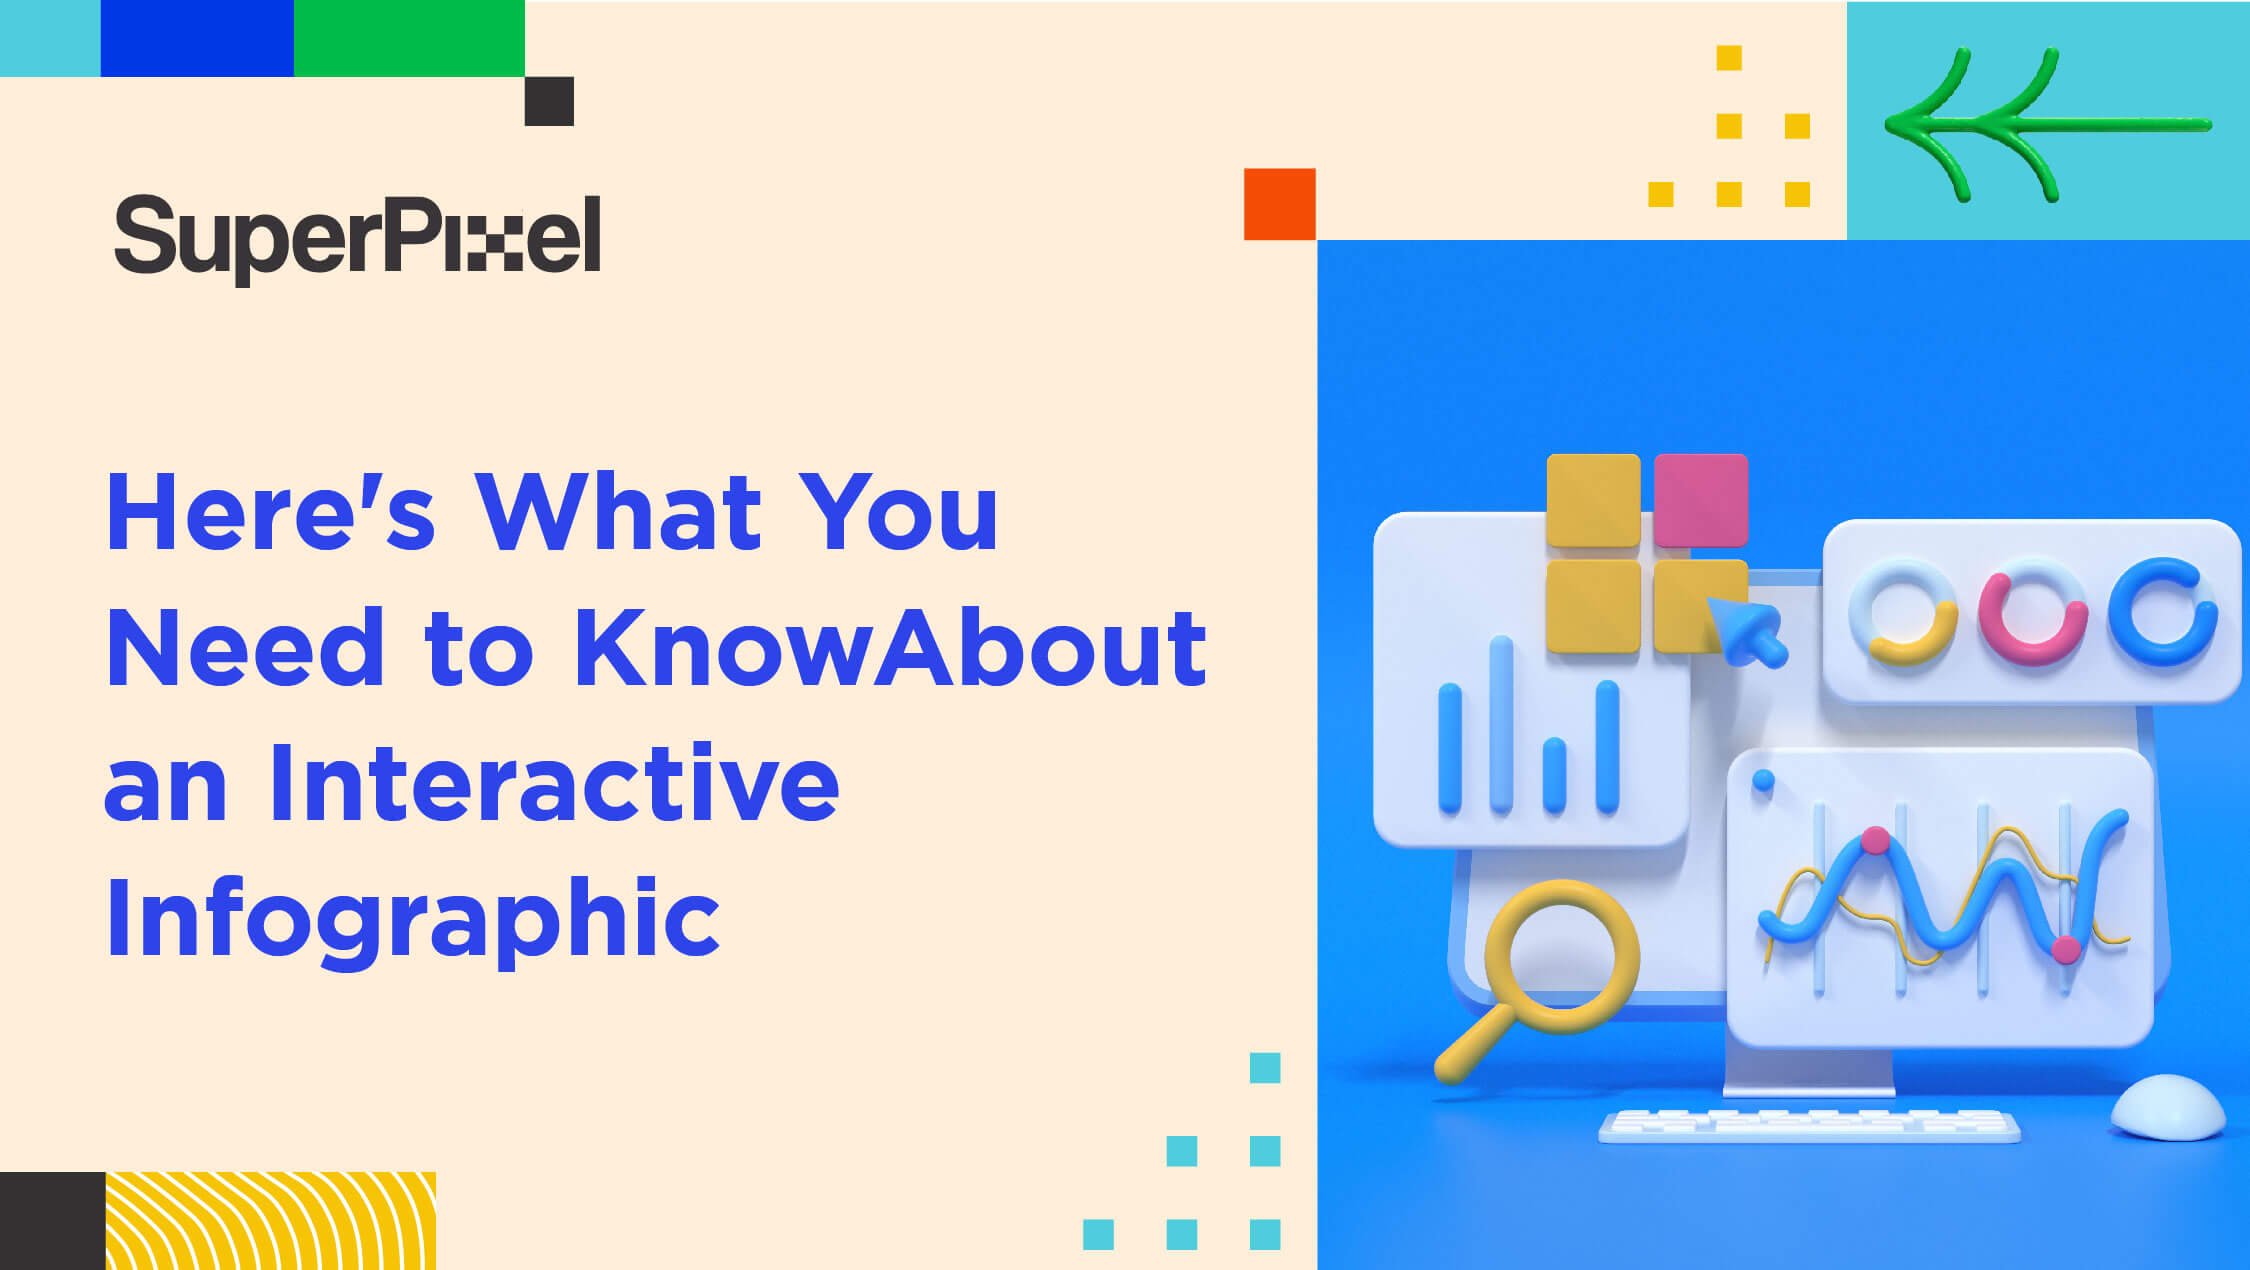 Here's What You Need to Know About an Interactive Infographic